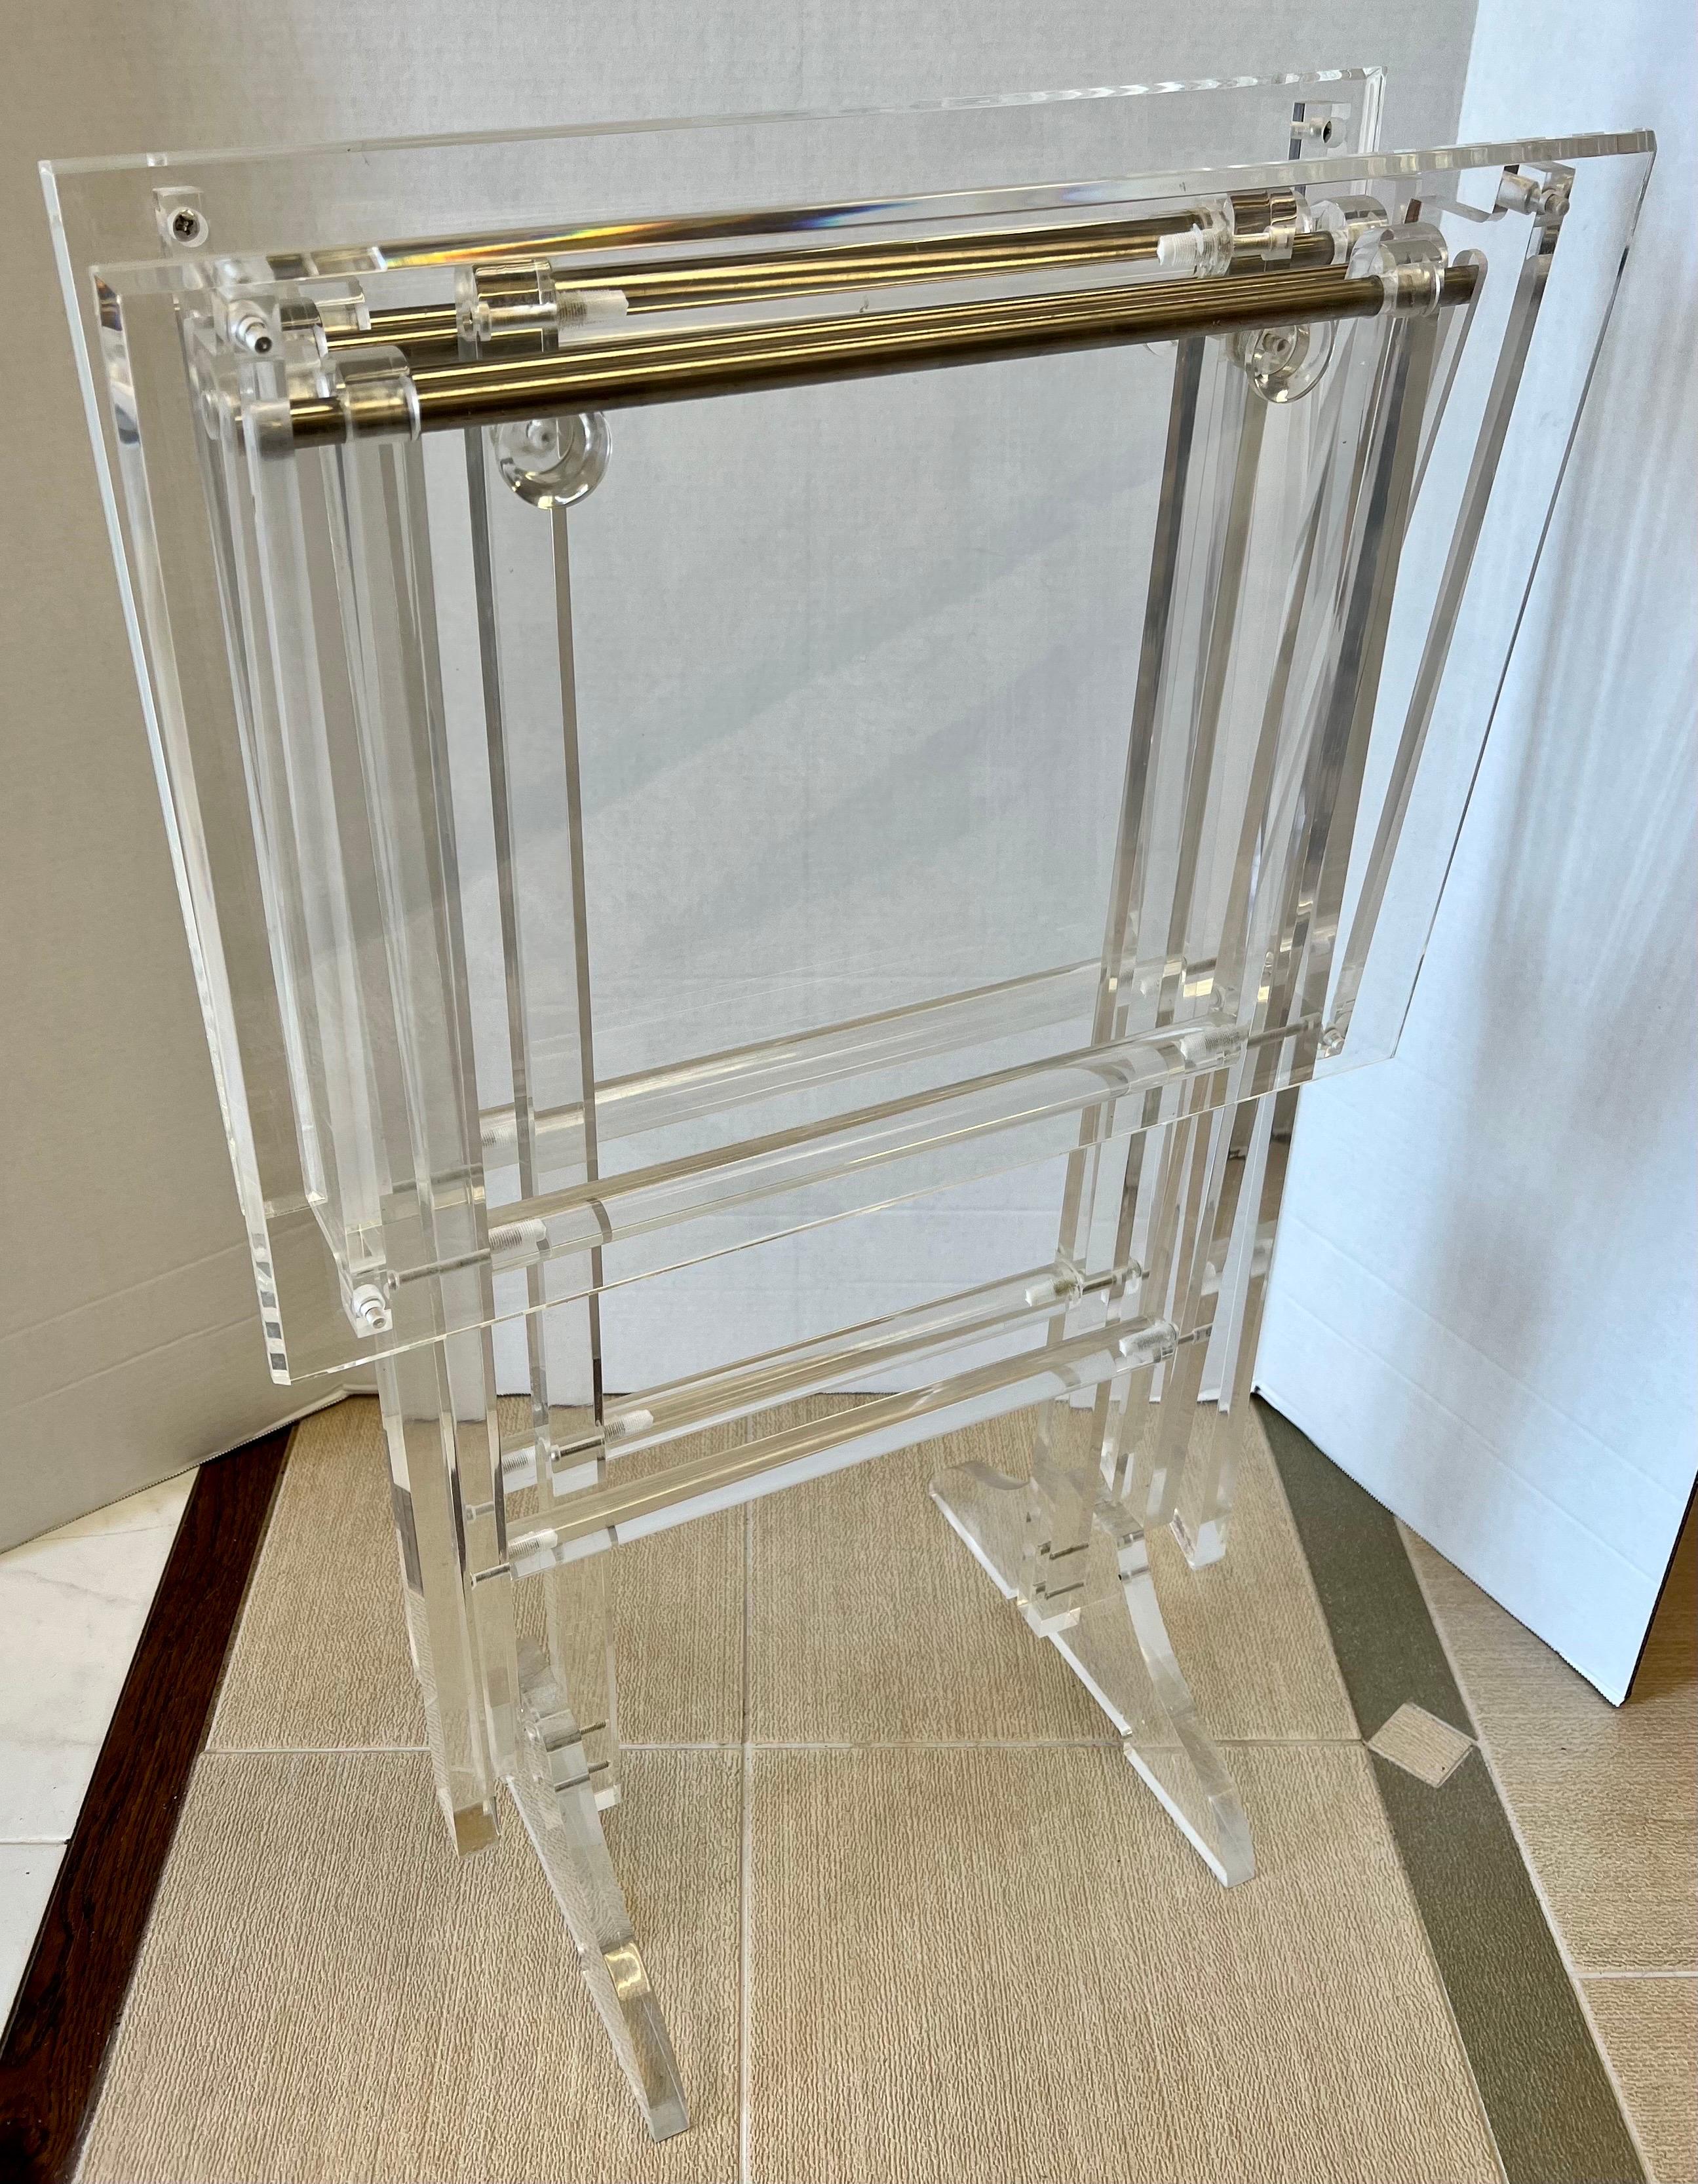 Sleek and sexy fold up TV trays? Yes! they are all lucite and sit on a secure lucite stand when they are not in use. Iconic mid century modern lines. Great scale.
Why not own the best?.